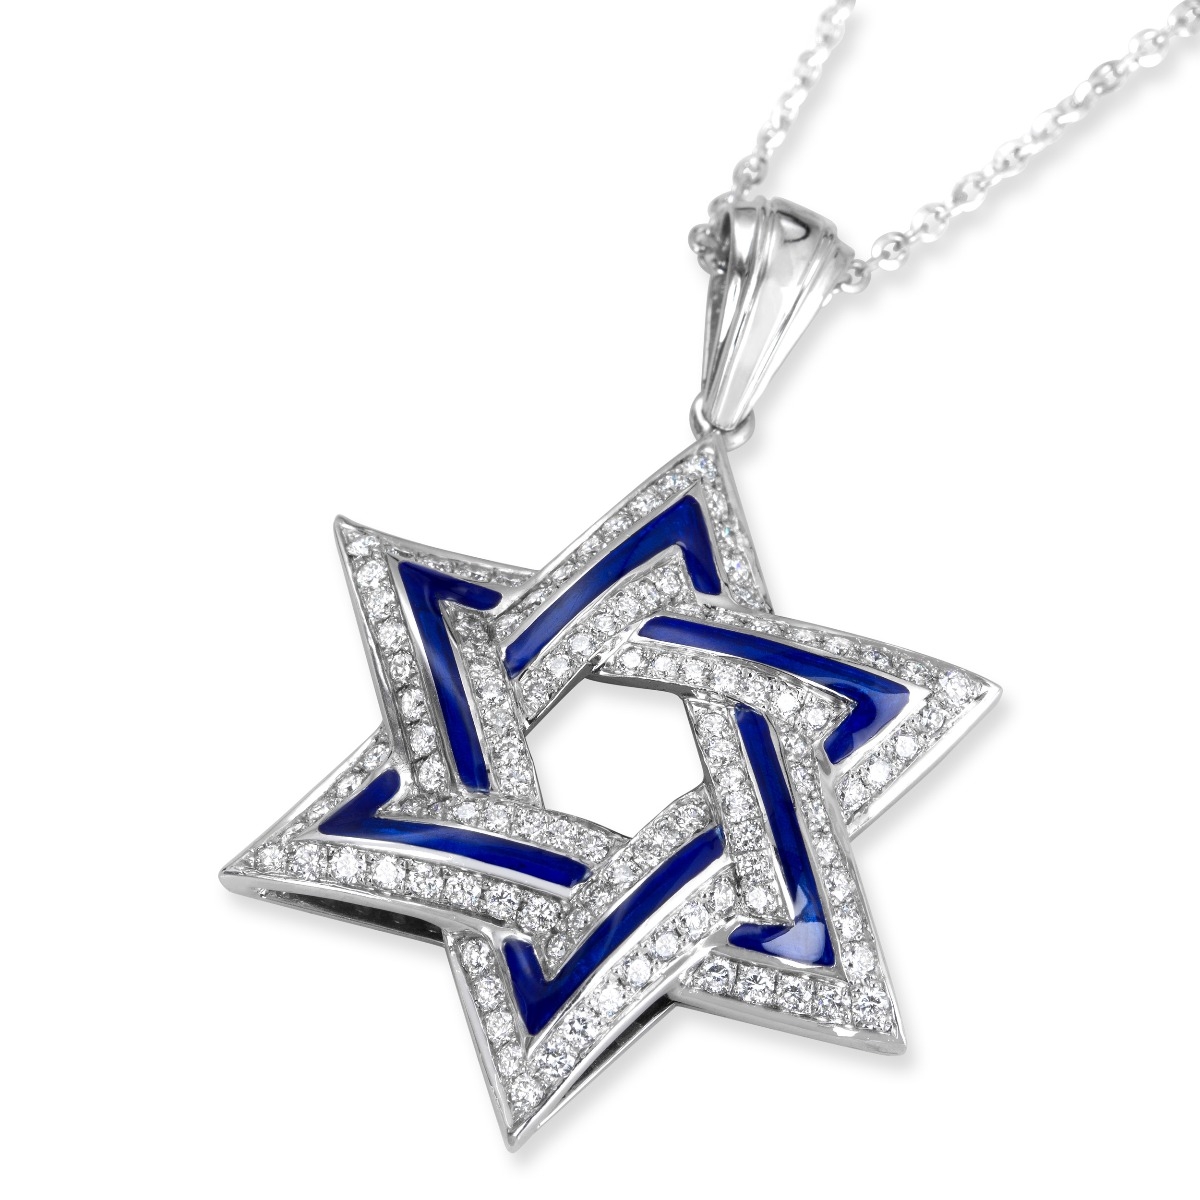 14K White Gold and Blue Enamel Star of David Pendant With 114 Diamonds - 1